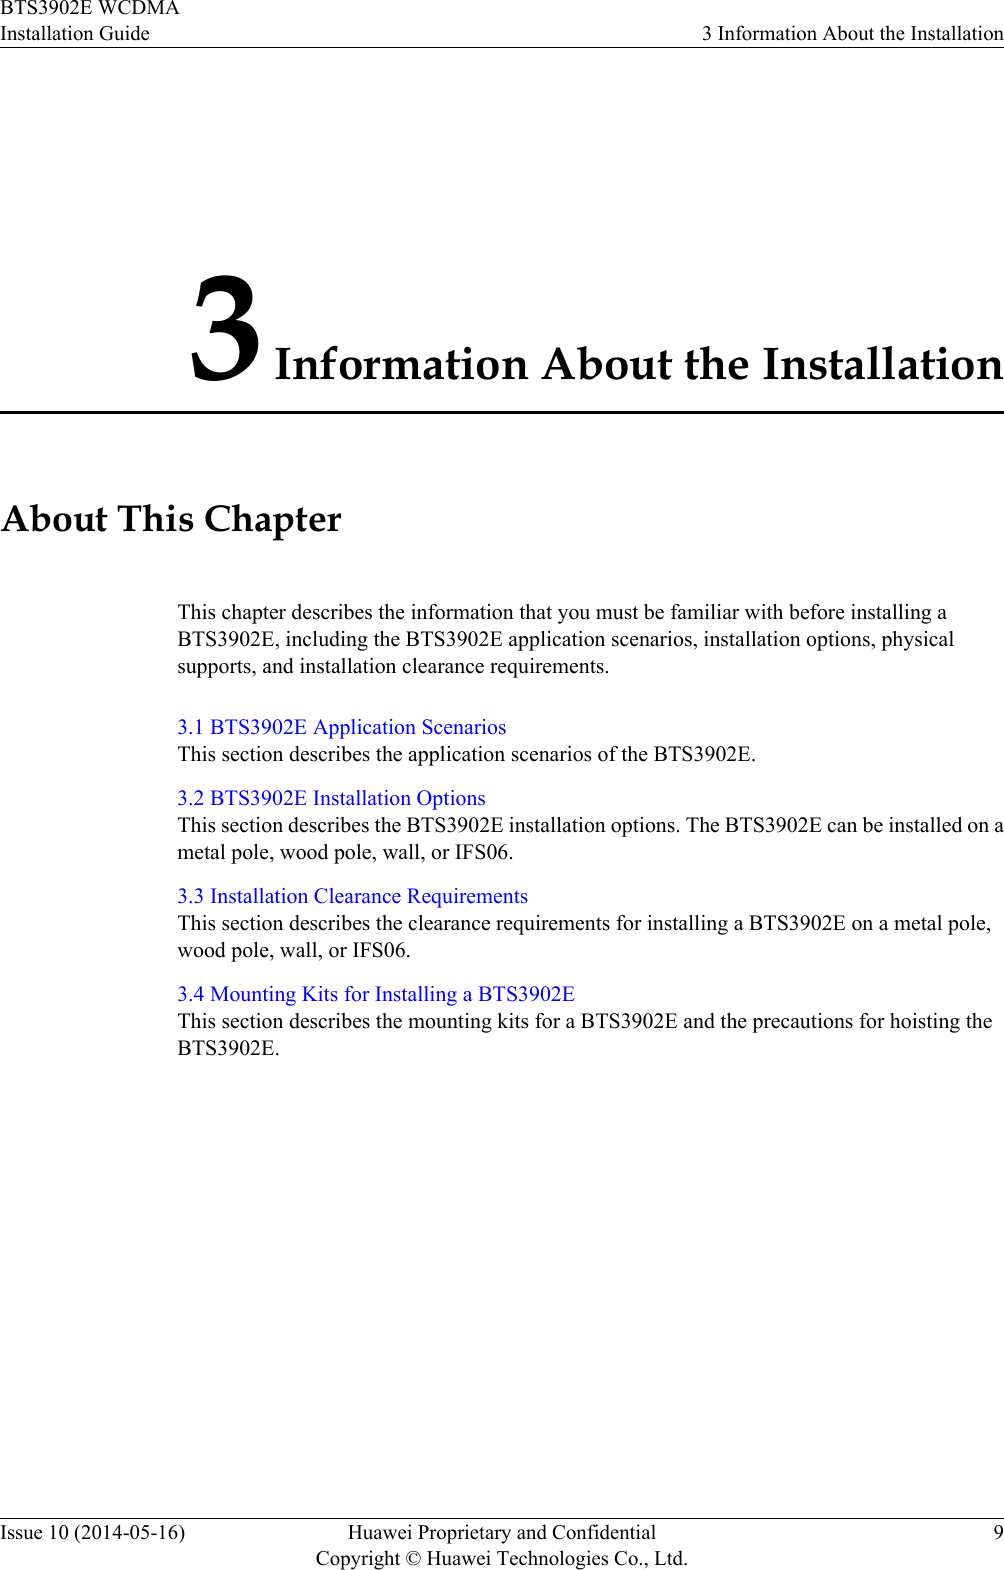 3 Information About the InstallationAbout This ChapterThis chapter describes the information that you must be familiar with before installing aBTS3902E, including the BTS3902E application scenarios, installation options, physicalsupports, and installation clearance requirements.3.1 BTS3902E Application ScenariosThis section describes the application scenarios of the BTS3902E.3.2 BTS3902E Installation OptionsThis section describes the BTS3902E installation options. The BTS3902E can be installed on ametal pole, wood pole, wall, or IFS06.3.3 Installation Clearance RequirementsThis section describes the clearance requirements for installing a BTS3902E on a metal pole,wood pole, wall, or IFS06.3.4 Mounting Kits for Installing a BTS3902EThis section describes the mounting kits for a BTS3902E and the precautions for hoisting theBTS3902E.BTS3902E WCDMAInstallation Guide 3 Information About the InstallationIssue 10 (2014-05-16) Huawei Proprietary and ConfidentialCopyright © Huawei Technologies Co., Ltd.9